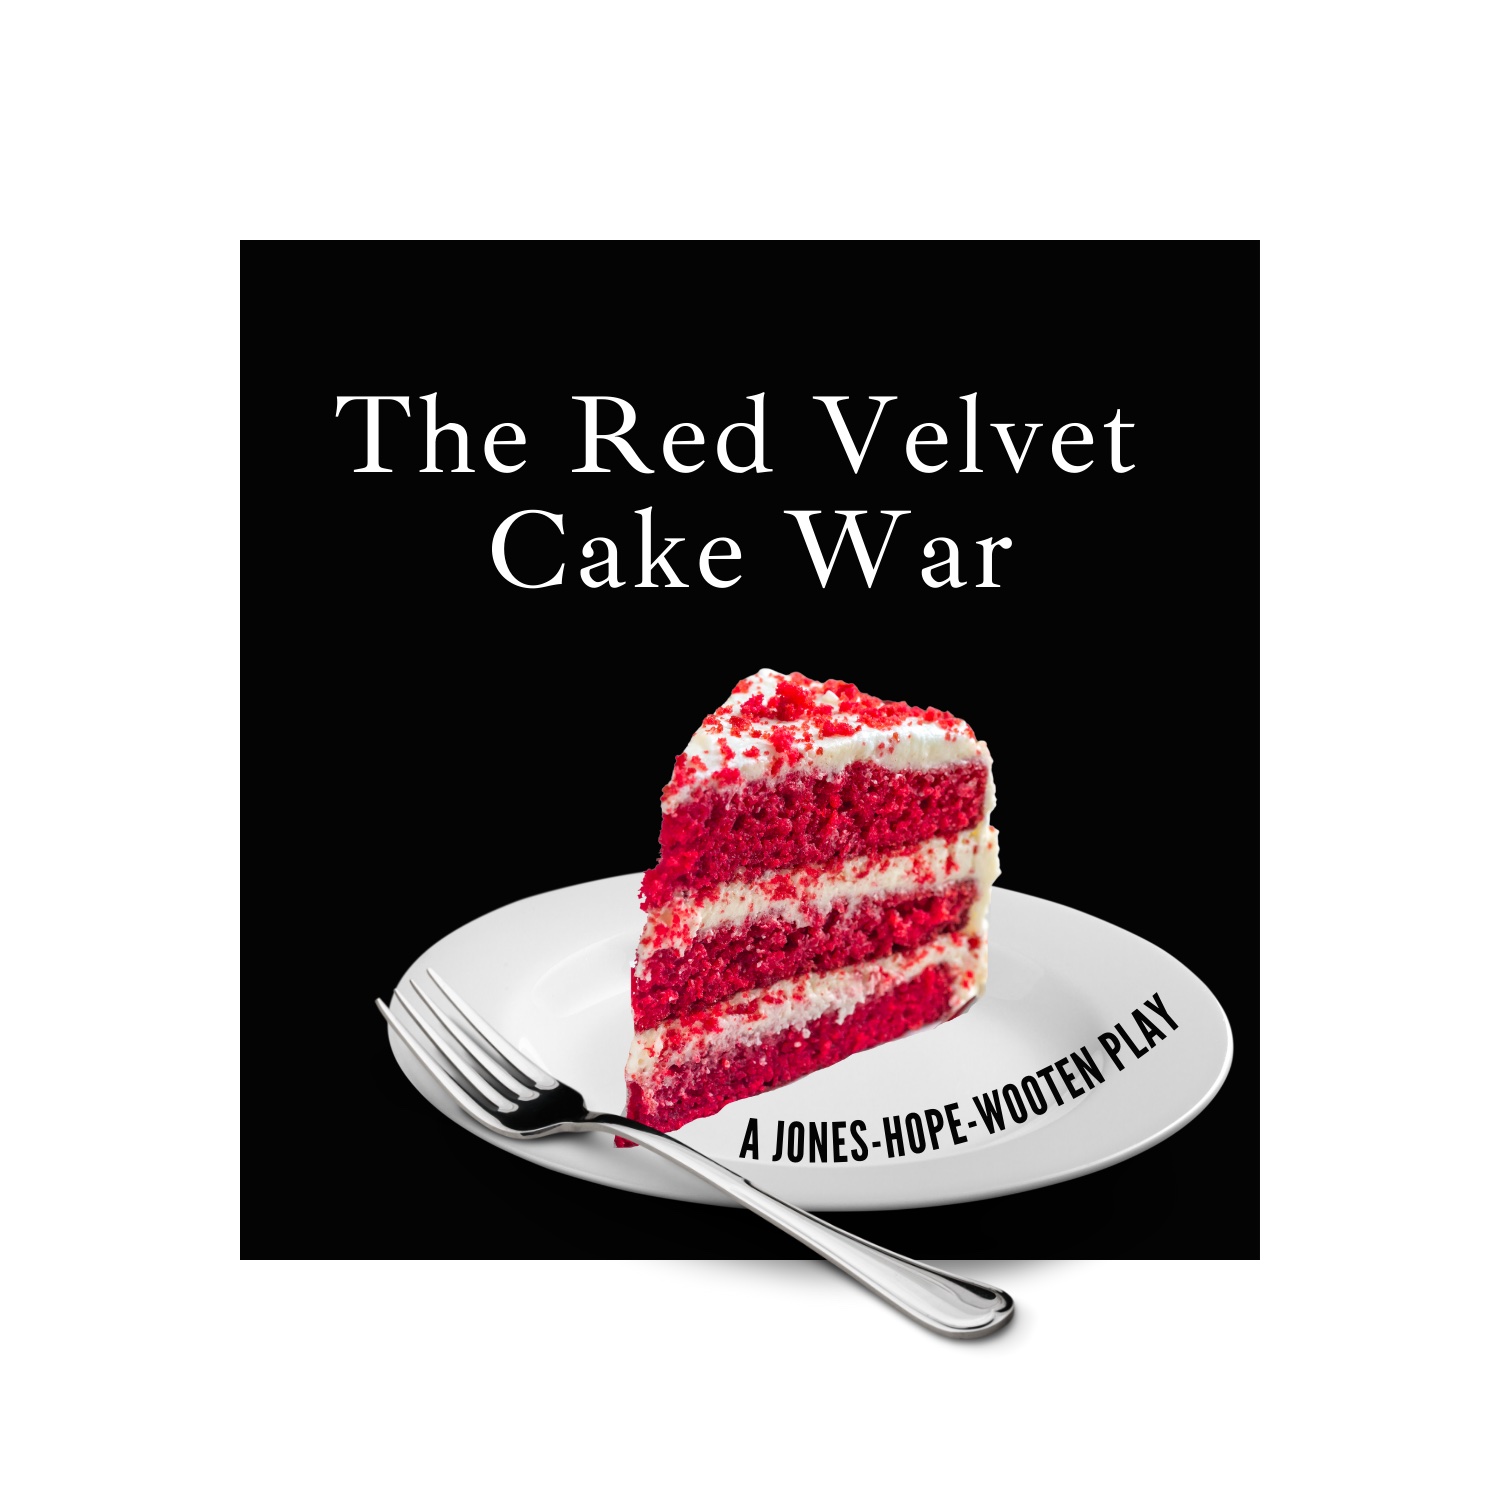 Auditions for The Red Velvet Cake War, by Georgetown Palace Theatre